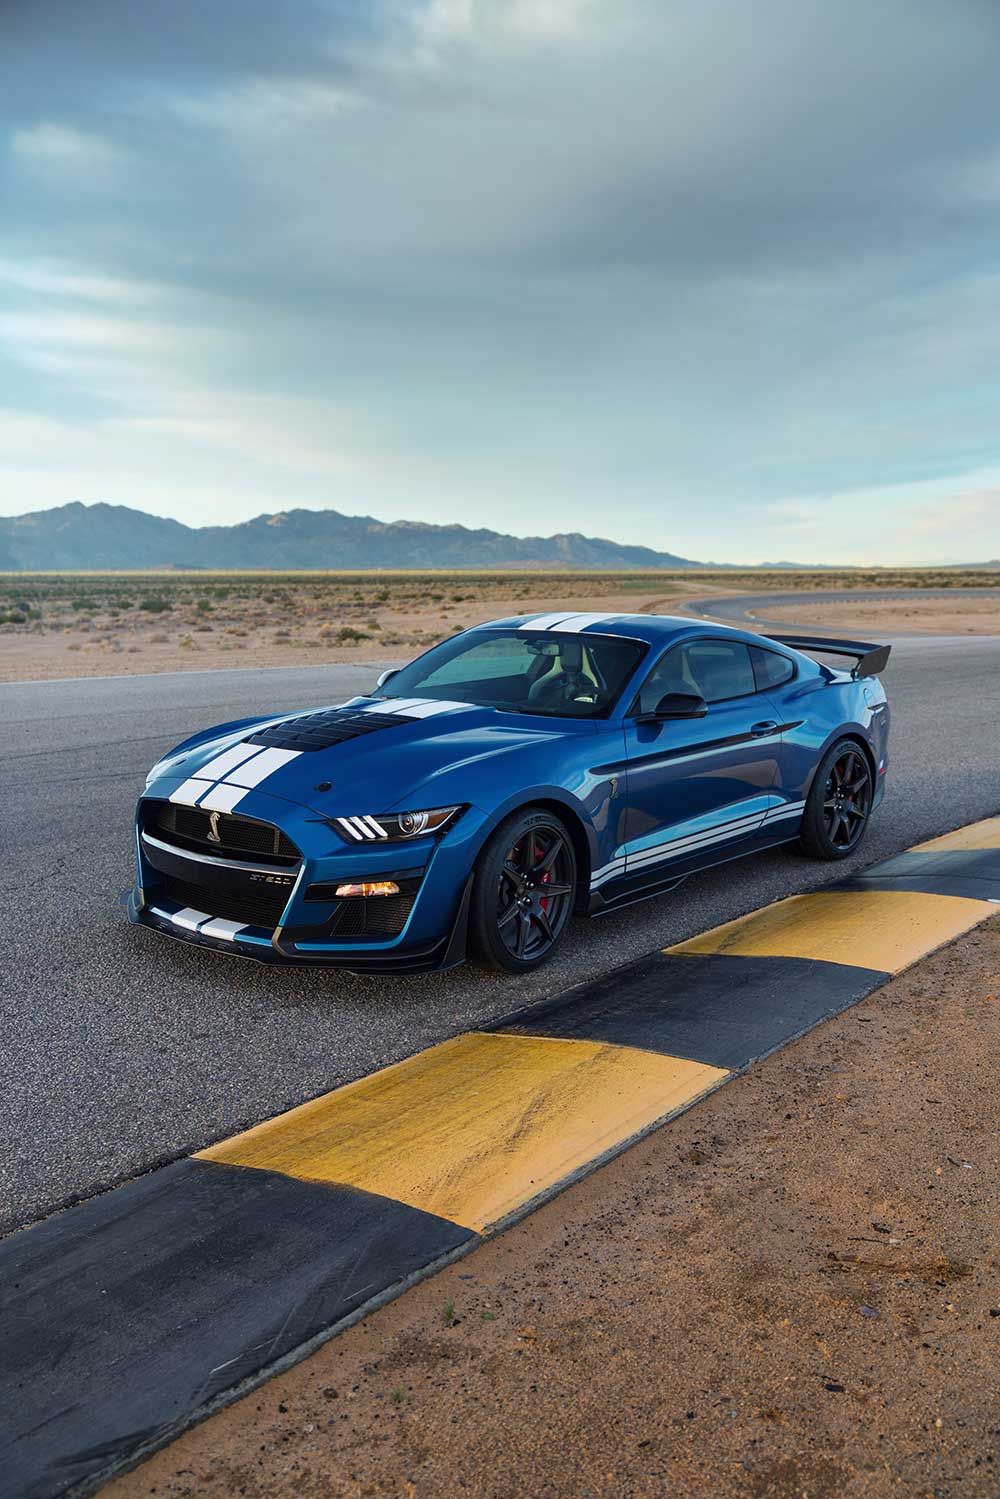 Ford Mustang Shelby Gt500 Pictures Wallpaper